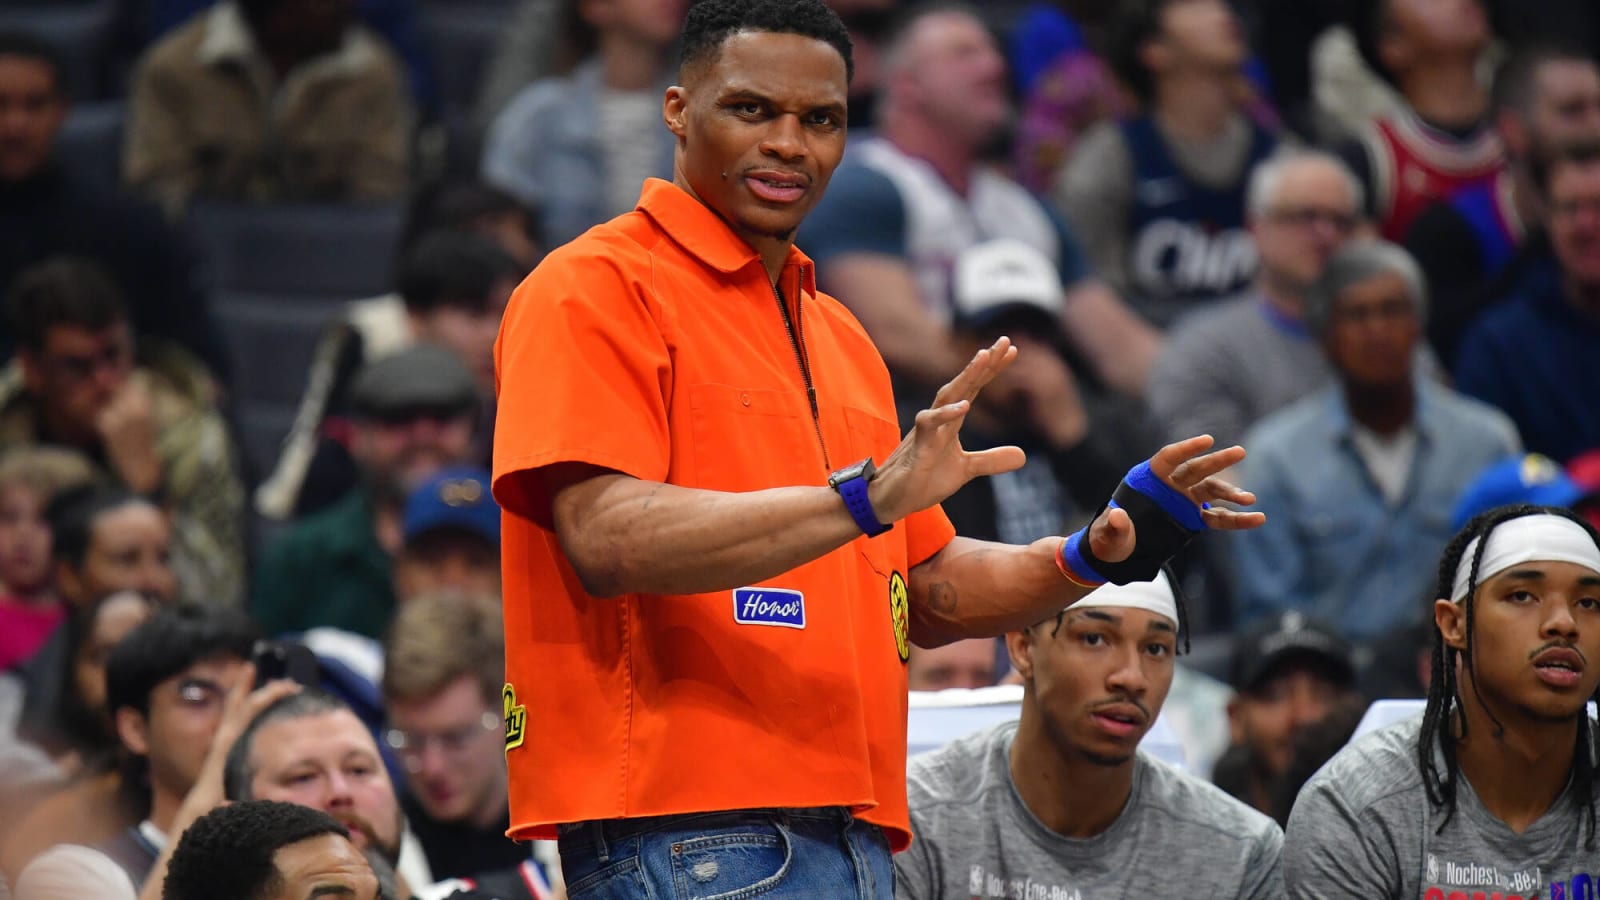 Report: Clippers’ Russell Westbrook To Play vs. Pacers After Missing 12 Games